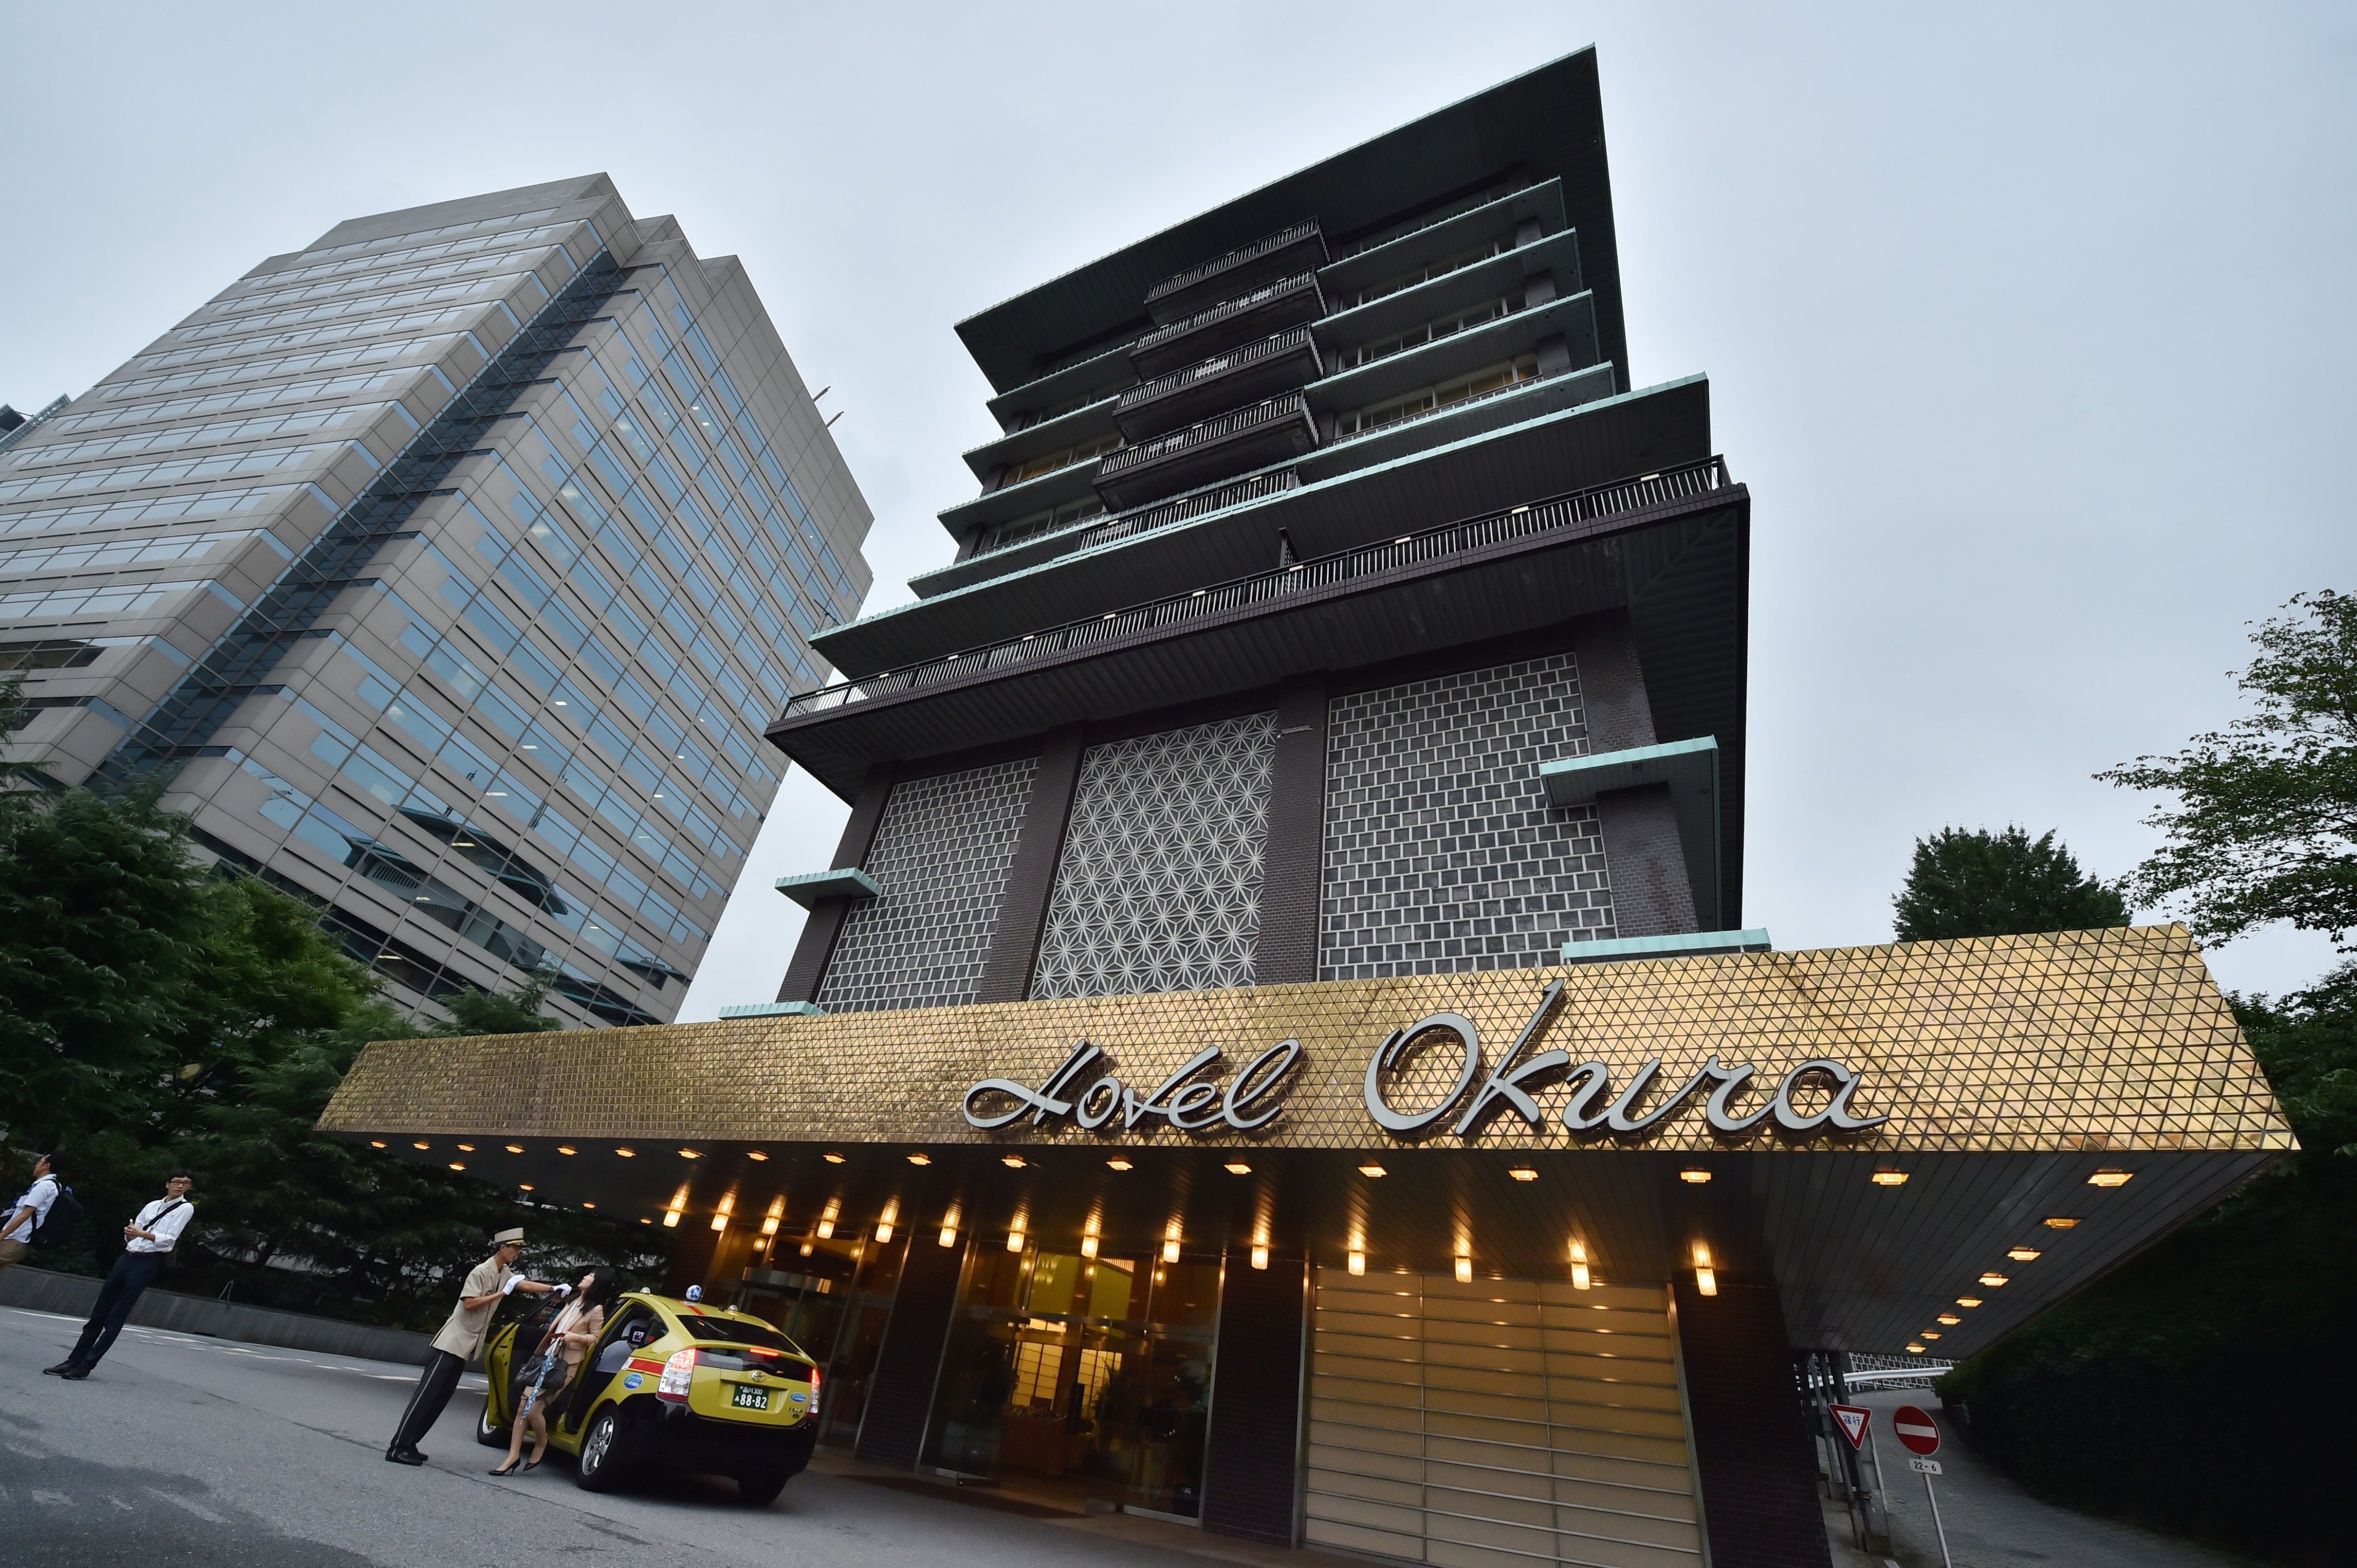 An employee of Japan's iconic Hotel Okura greets customers at an entrance in Tokyo on Aug. 31, 2015 (Kazuhiro Nogi—AFP/Getty Images)